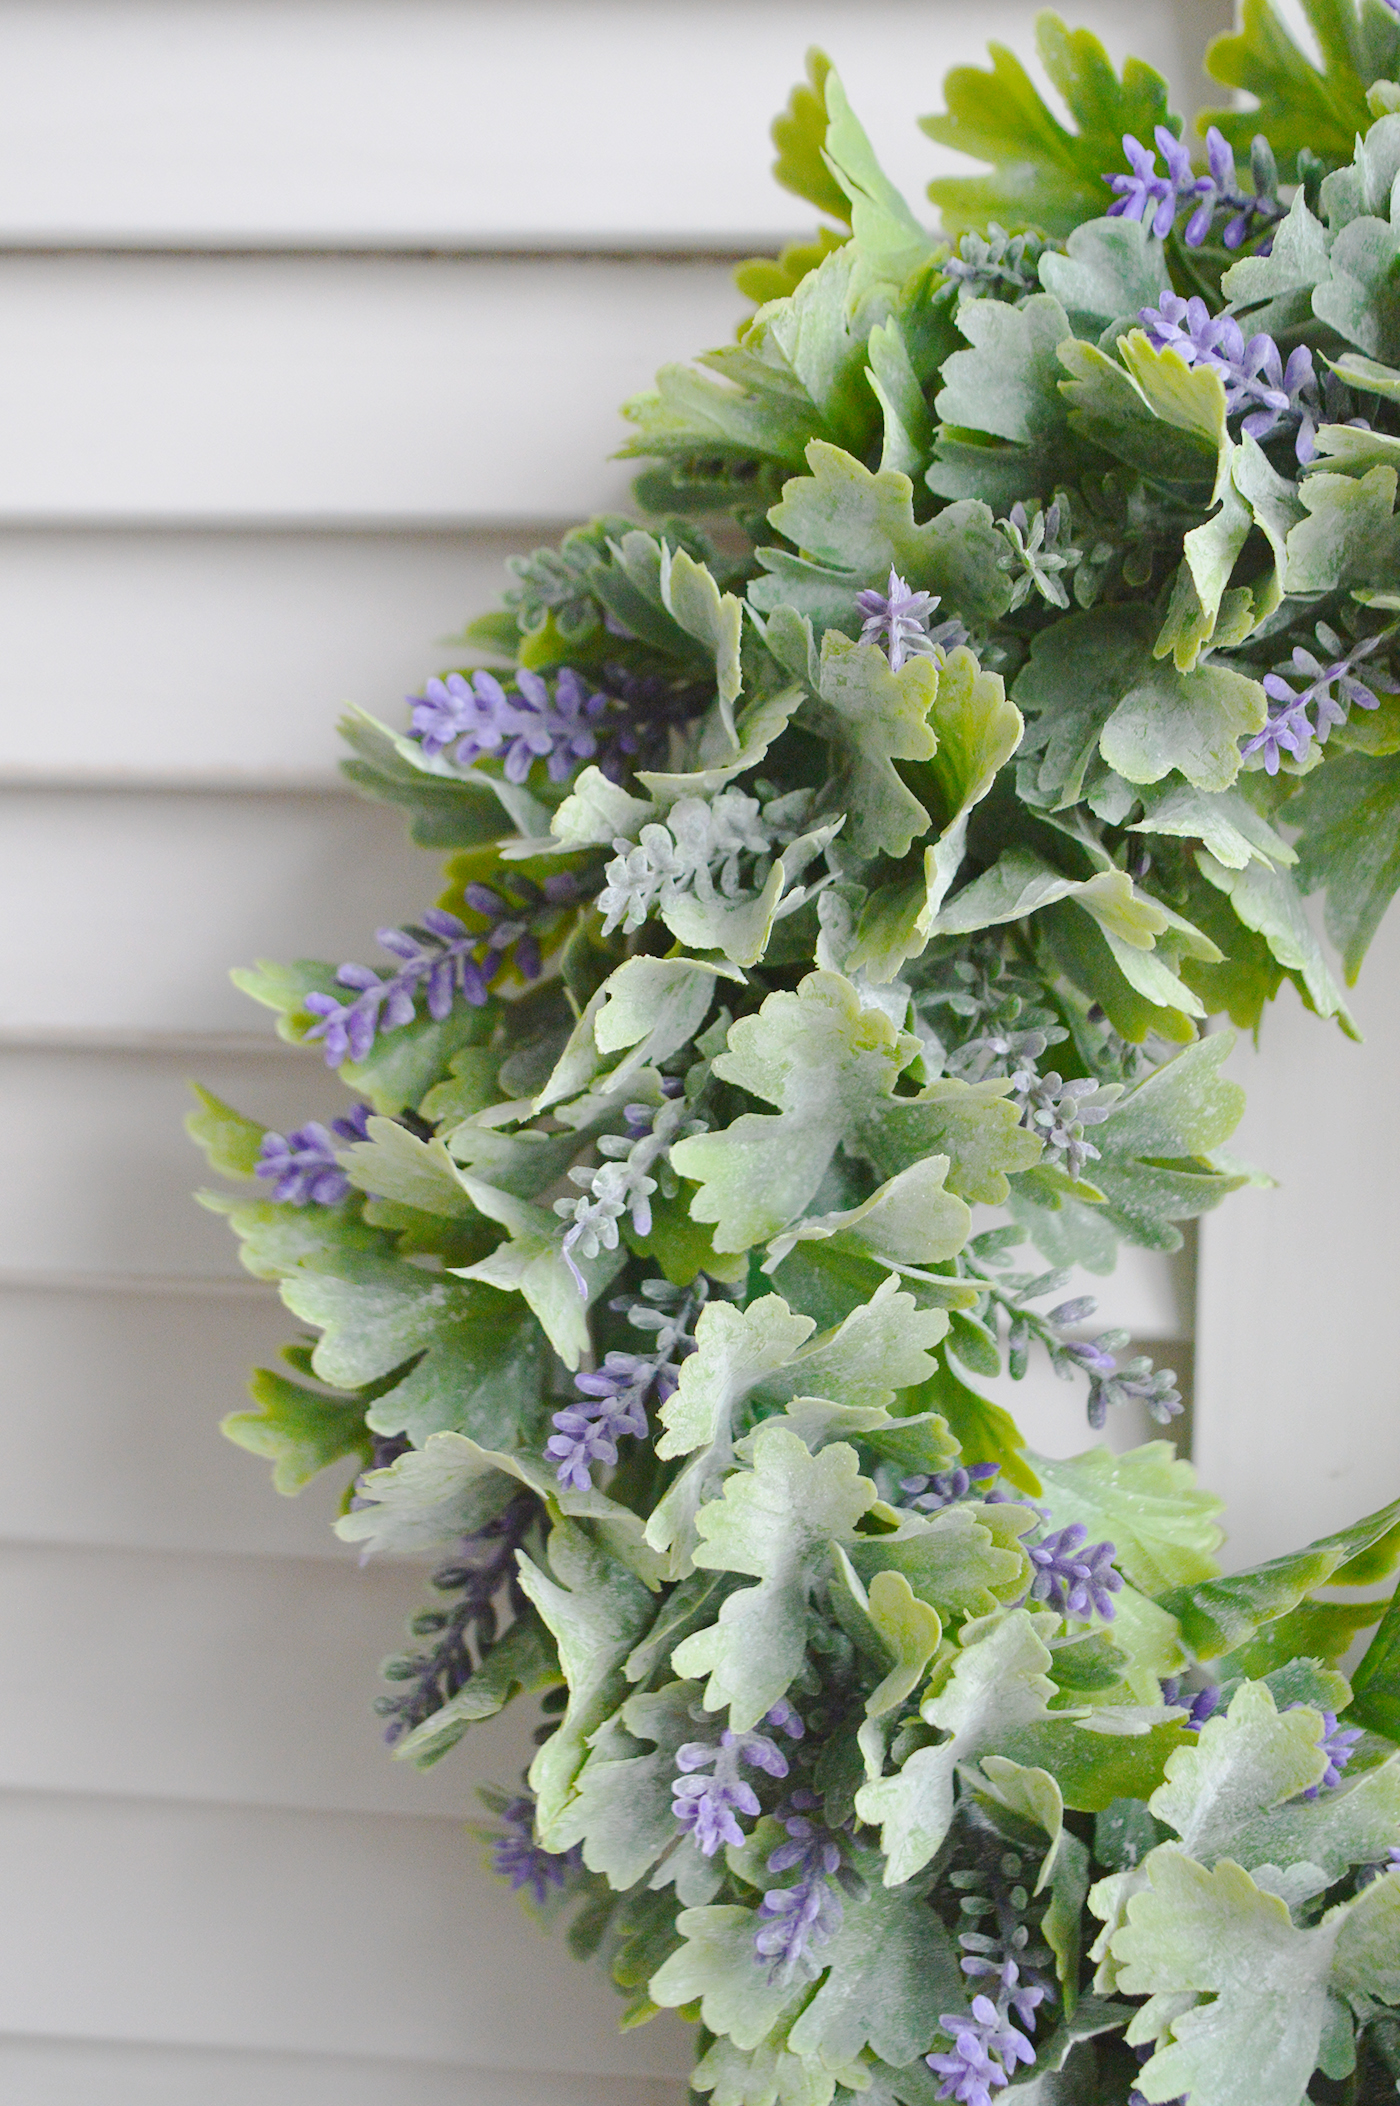 Lavender Wreath for a traditional New England look to your room from The White Lighthouse Furniture for the hallway, living room, bedroom and bathroom. New England coastal, country and farmhouse interiors